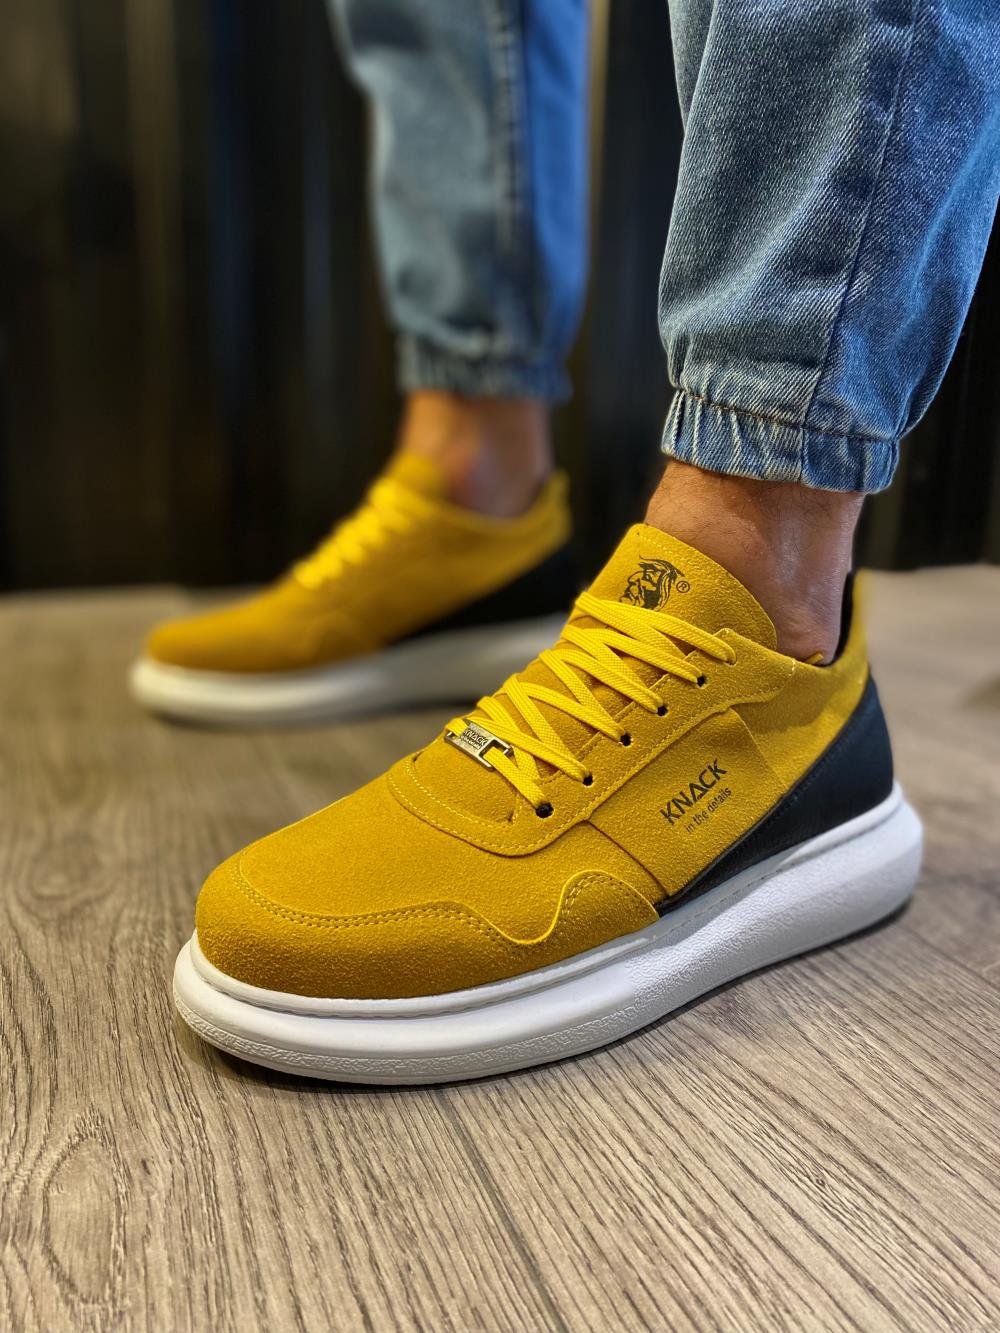 Men's High Sole Casual Suede Shoes 040 Yellow